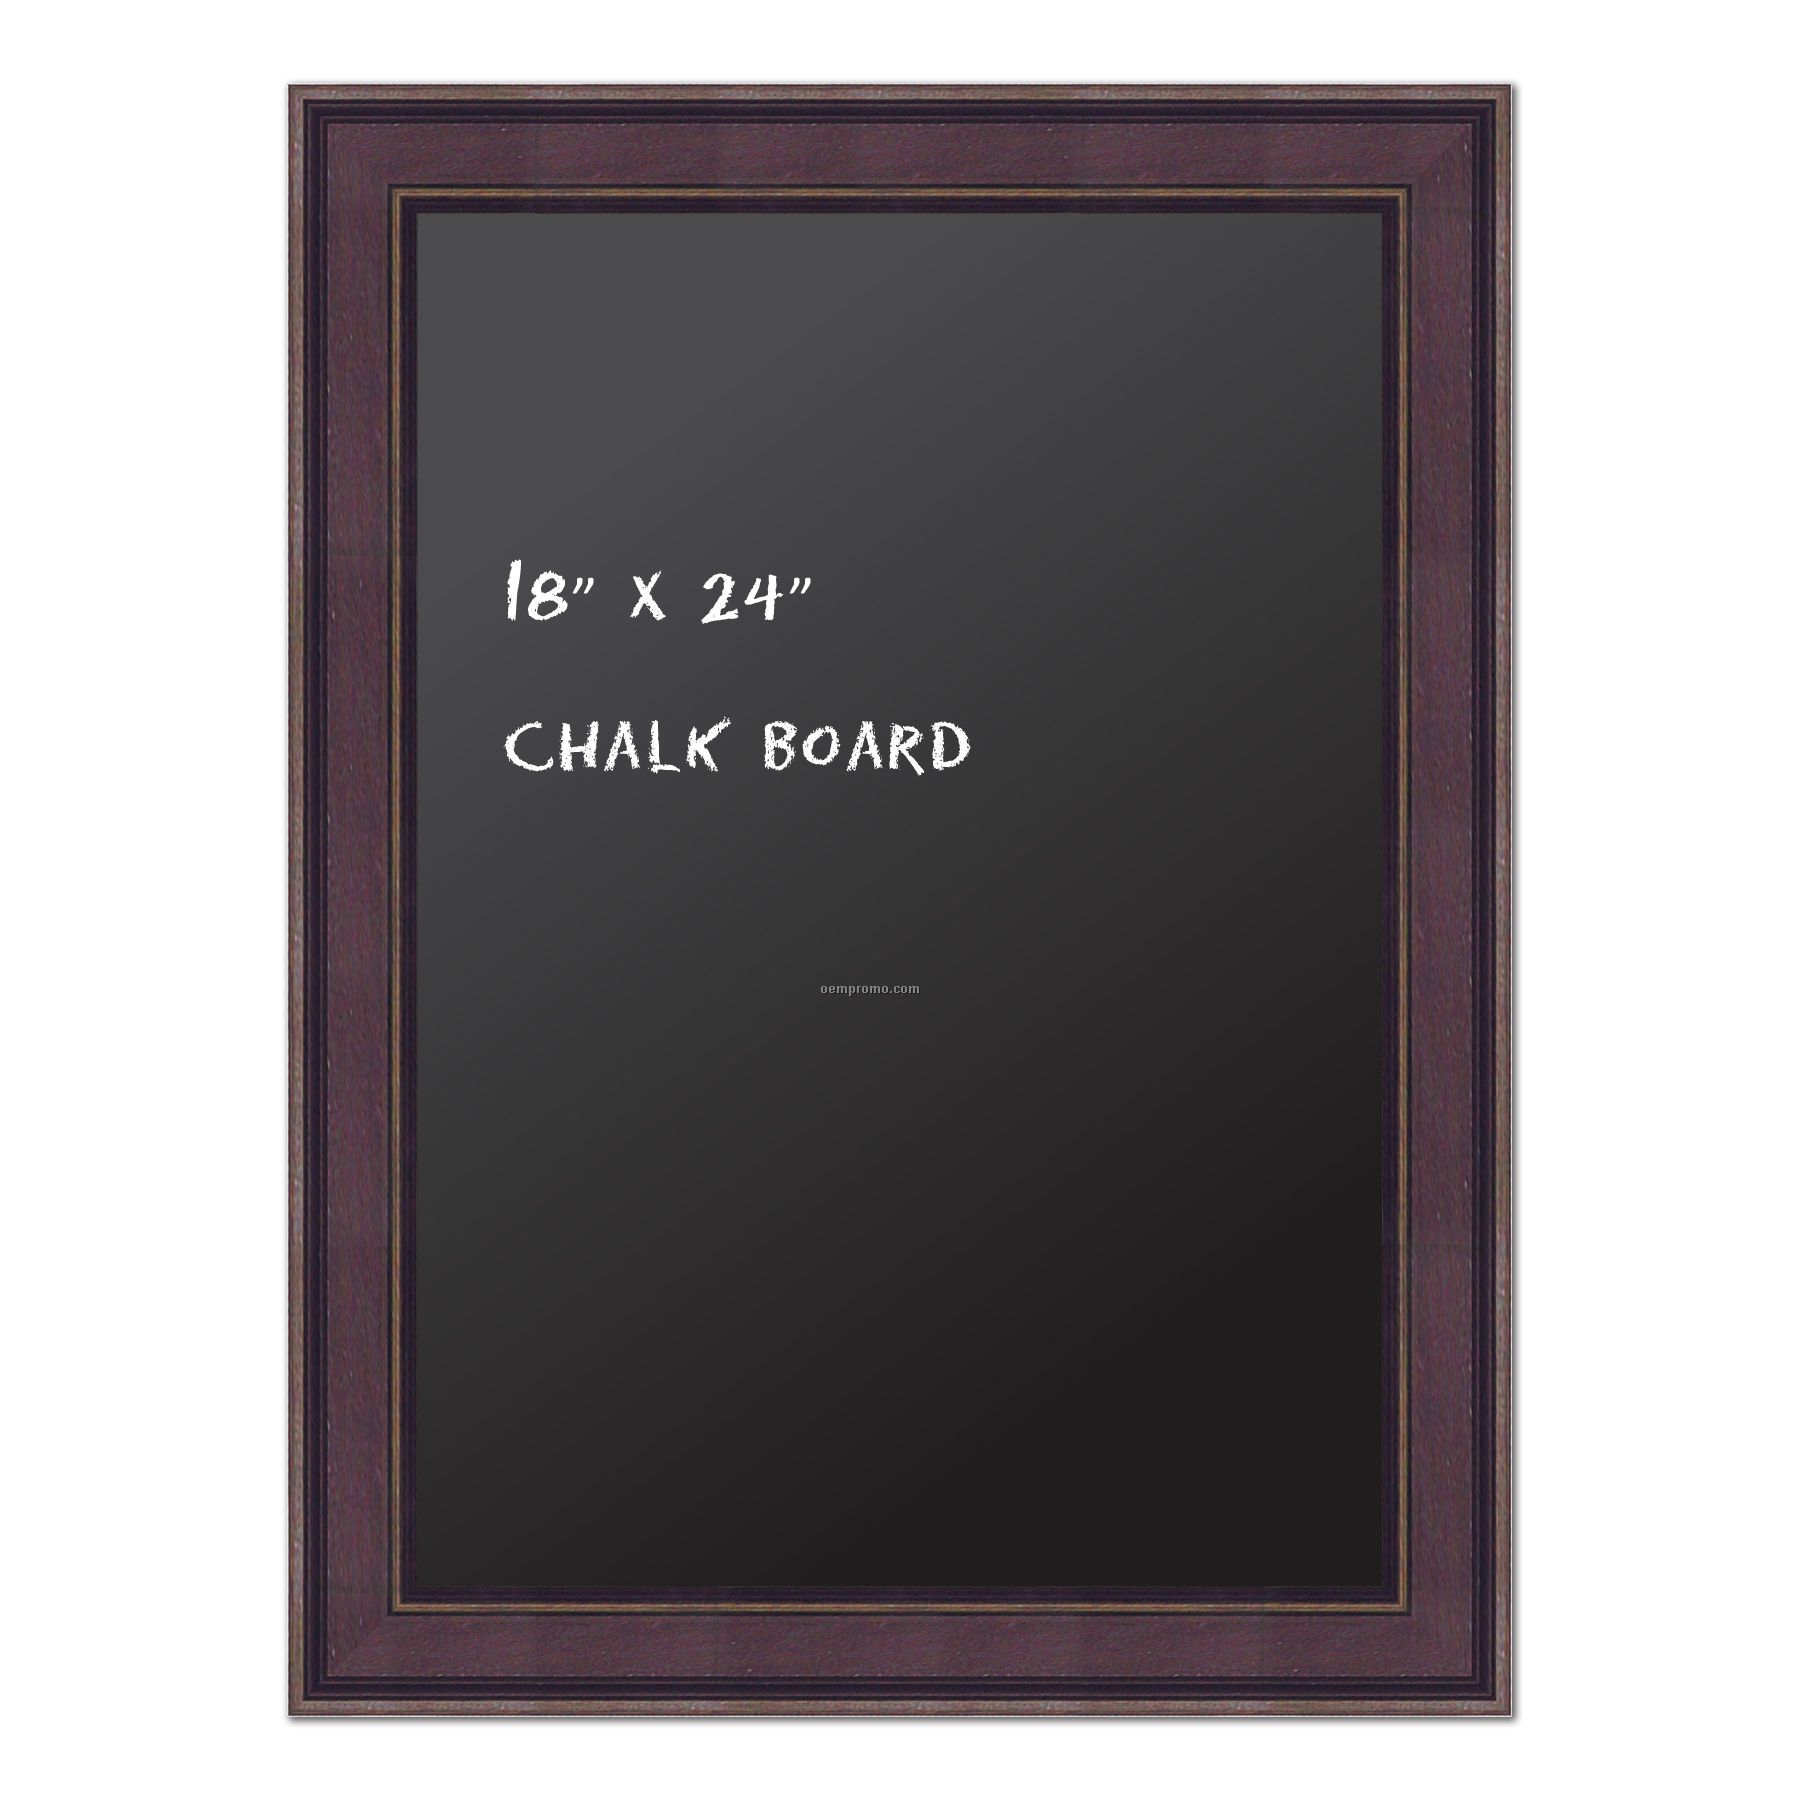 Chalk Board 18" X 24". Real Wood Frame - Country Wine Finish.